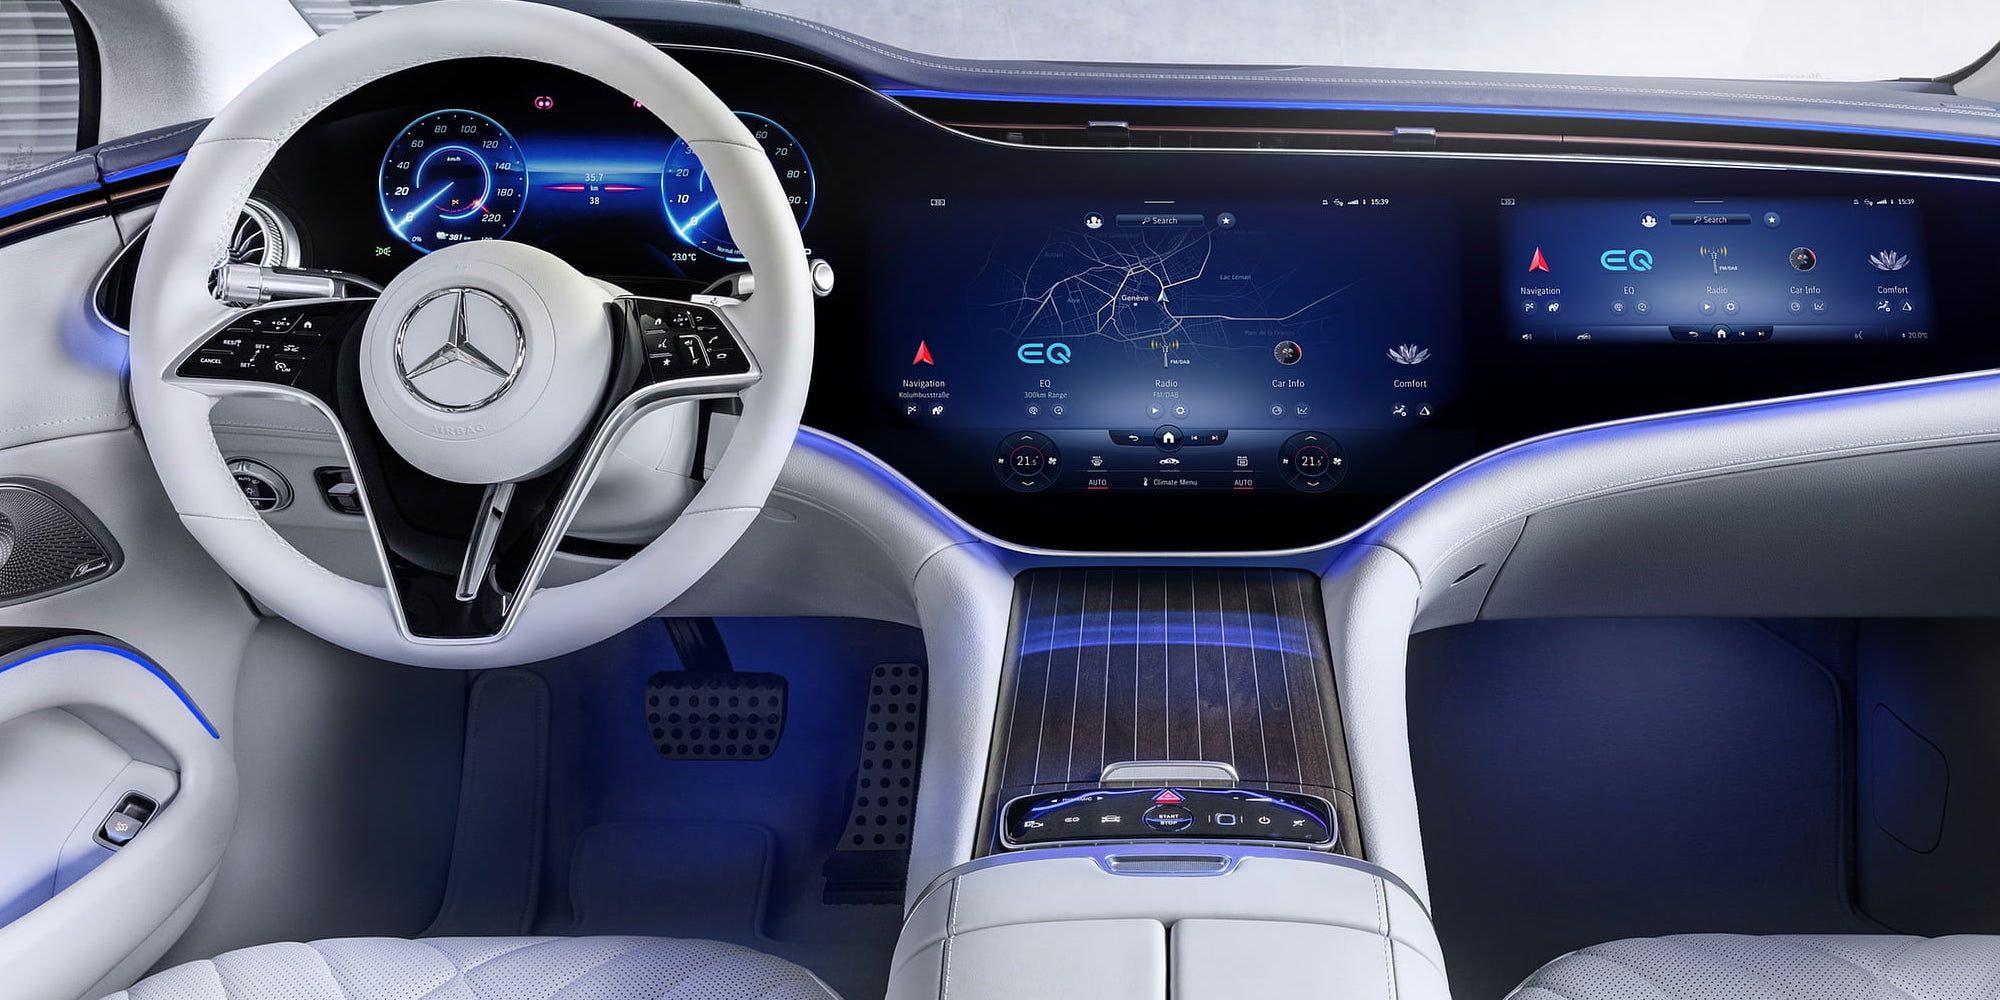 Biggest trend in new car technology? Super-sized screens